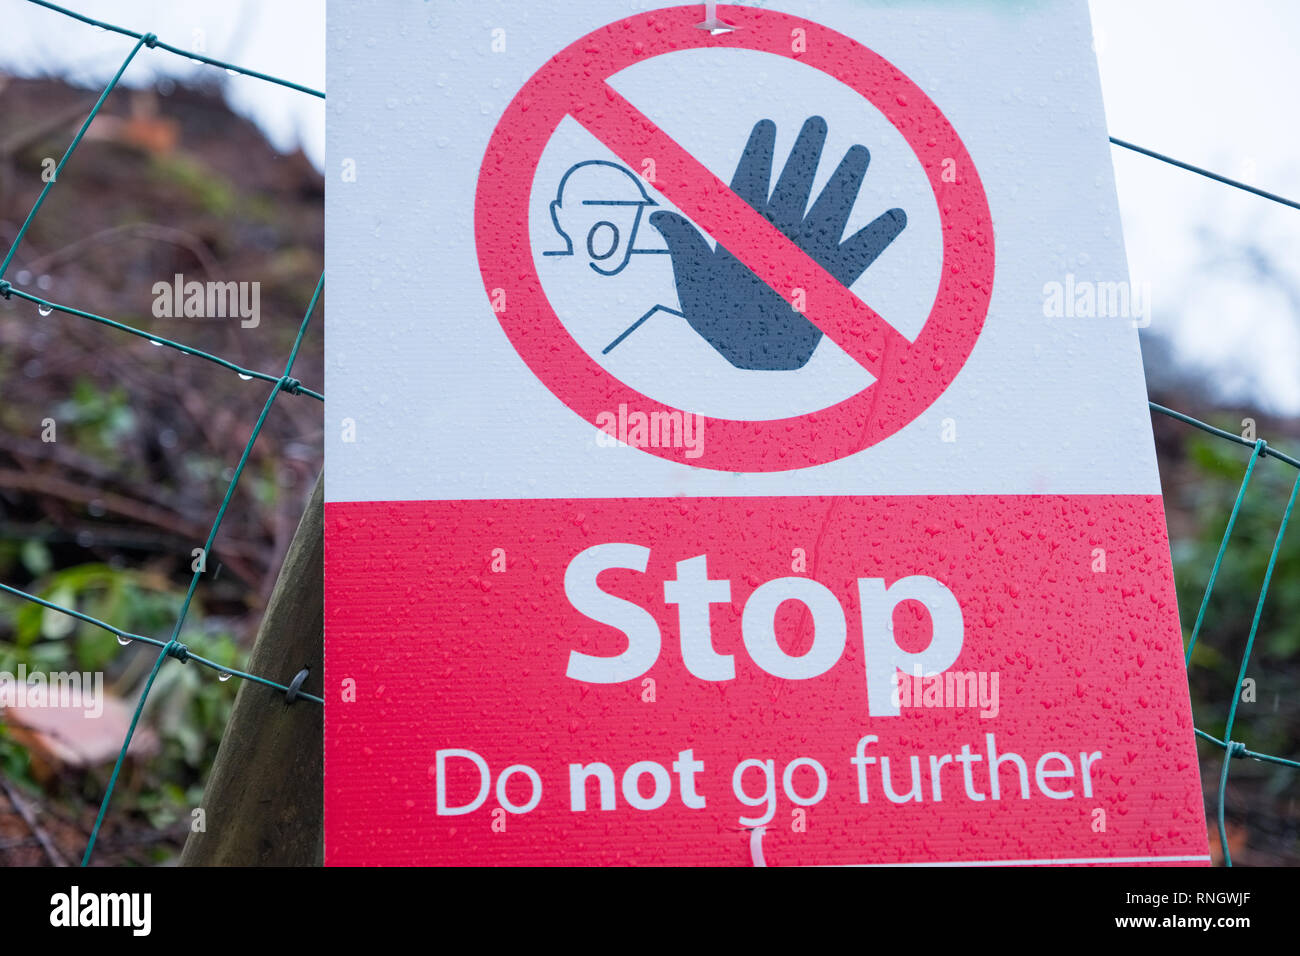 'STOP, Go no further'' sign Stock Photo